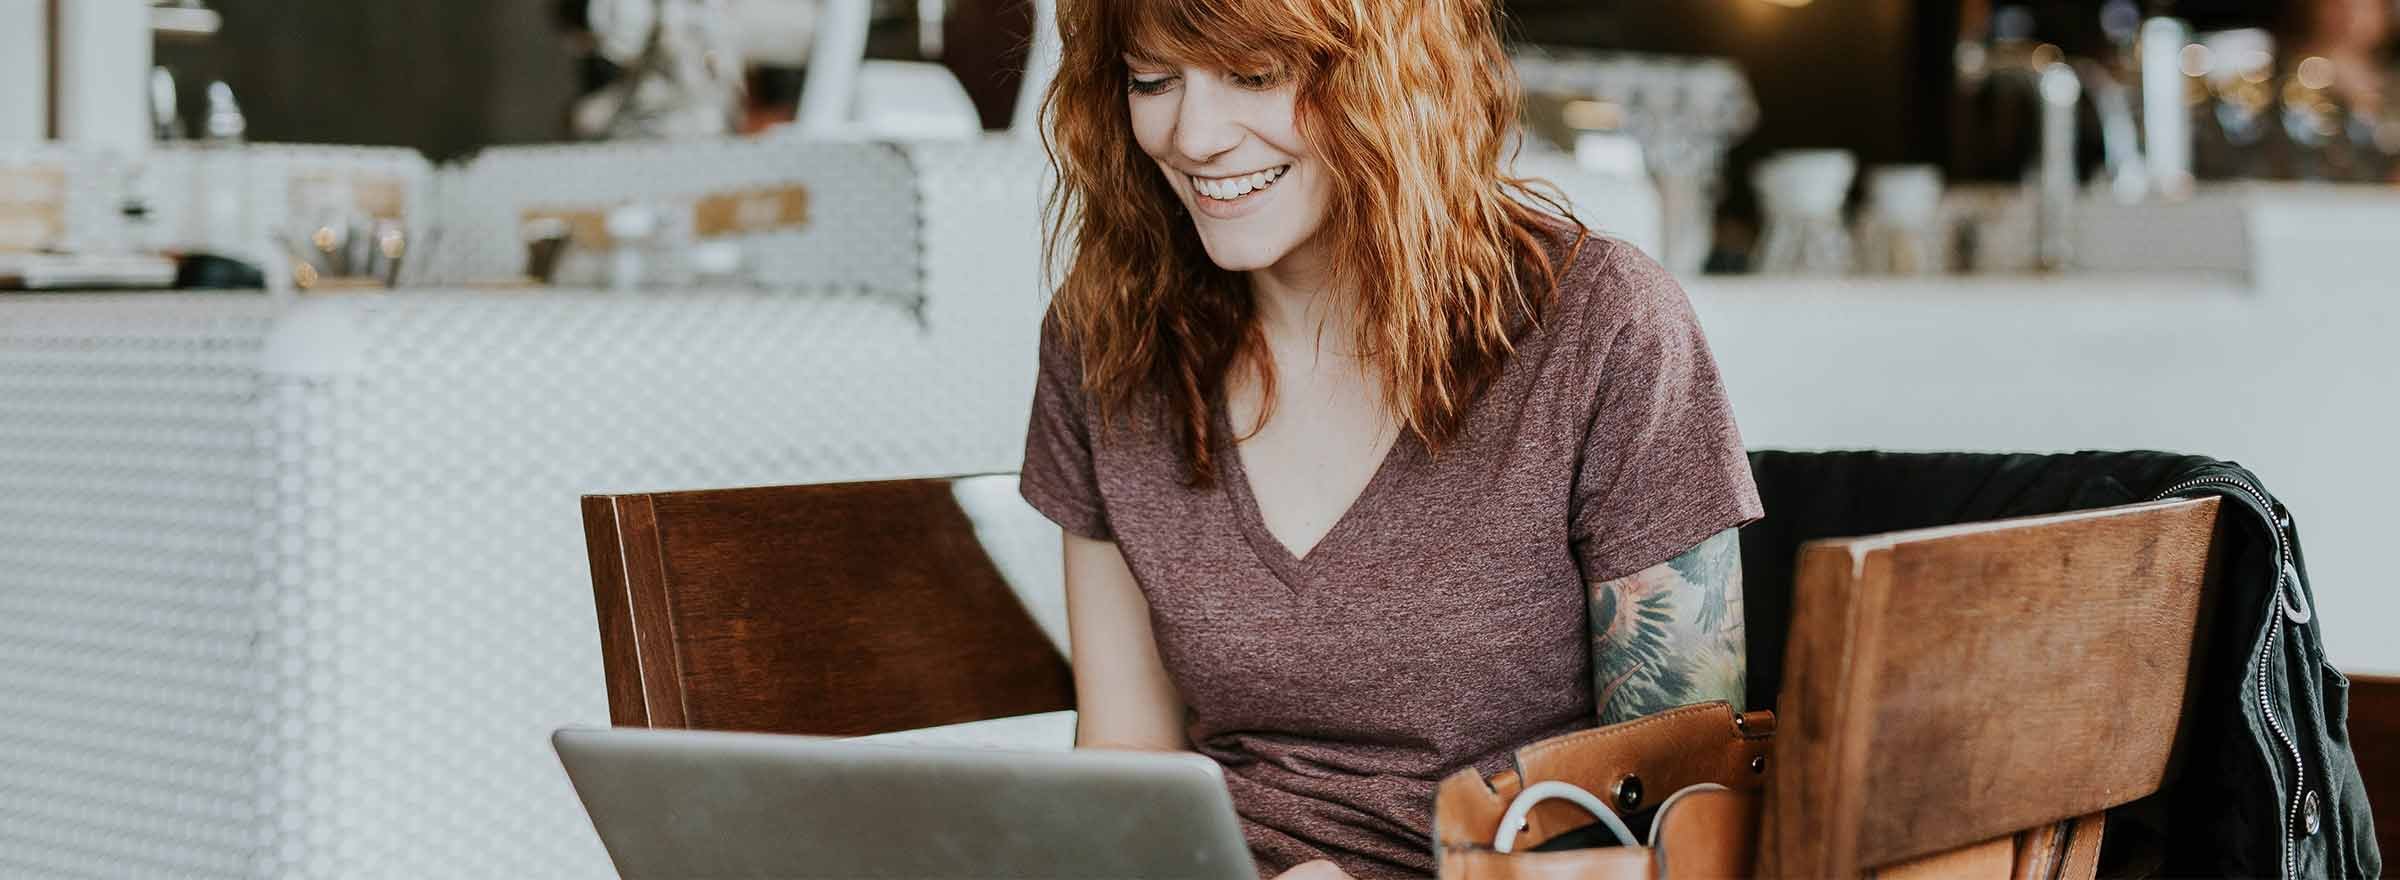 woman smiling at a laptop screen